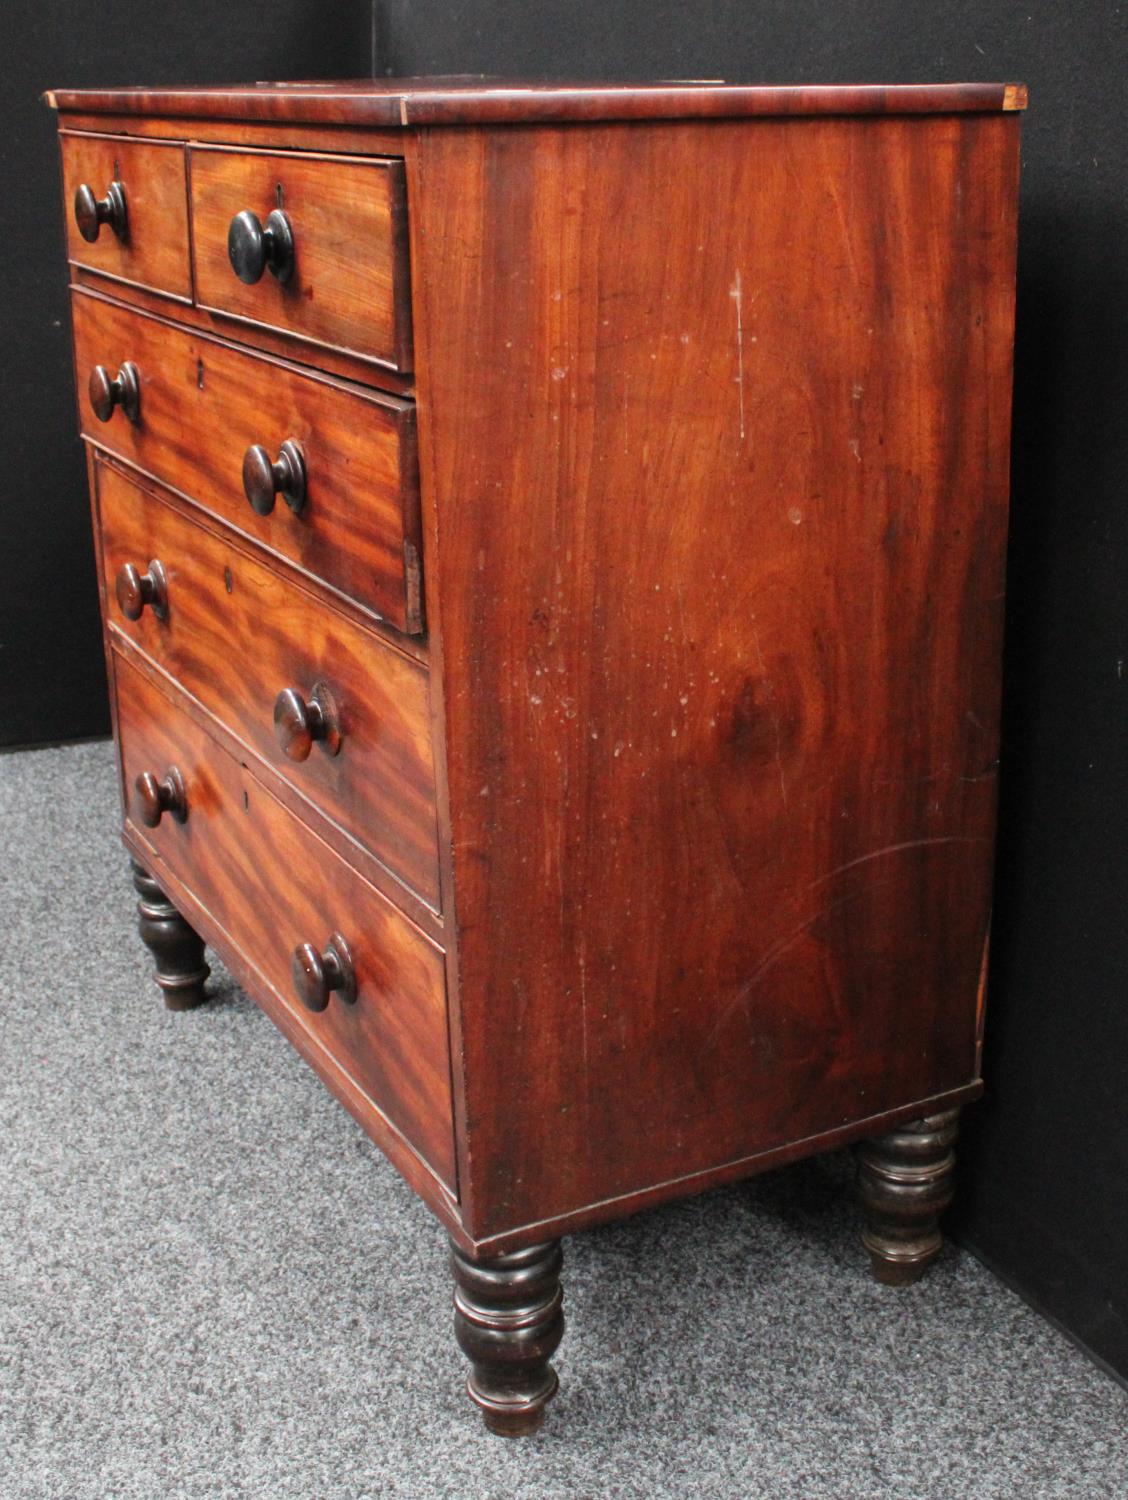 An early Victorian mahogany chest of drawers, c. - Image 3 of 7